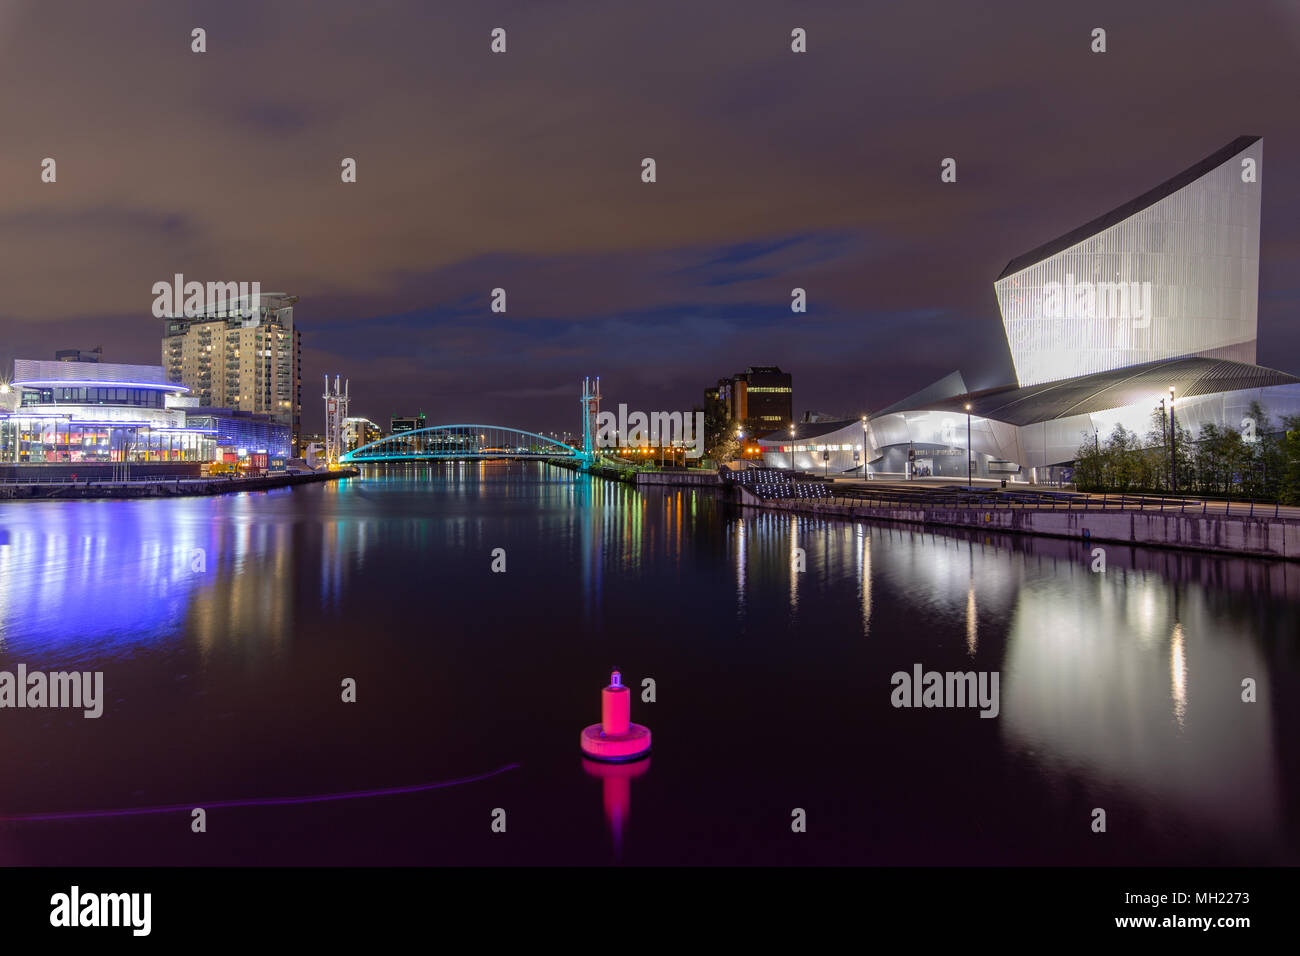 Night view of The Lowry Theatre & galleries, Imperial point building, Millenium lift foot bridge and Imperial war museum at Salford Quays, Trafford, G Stock Photo